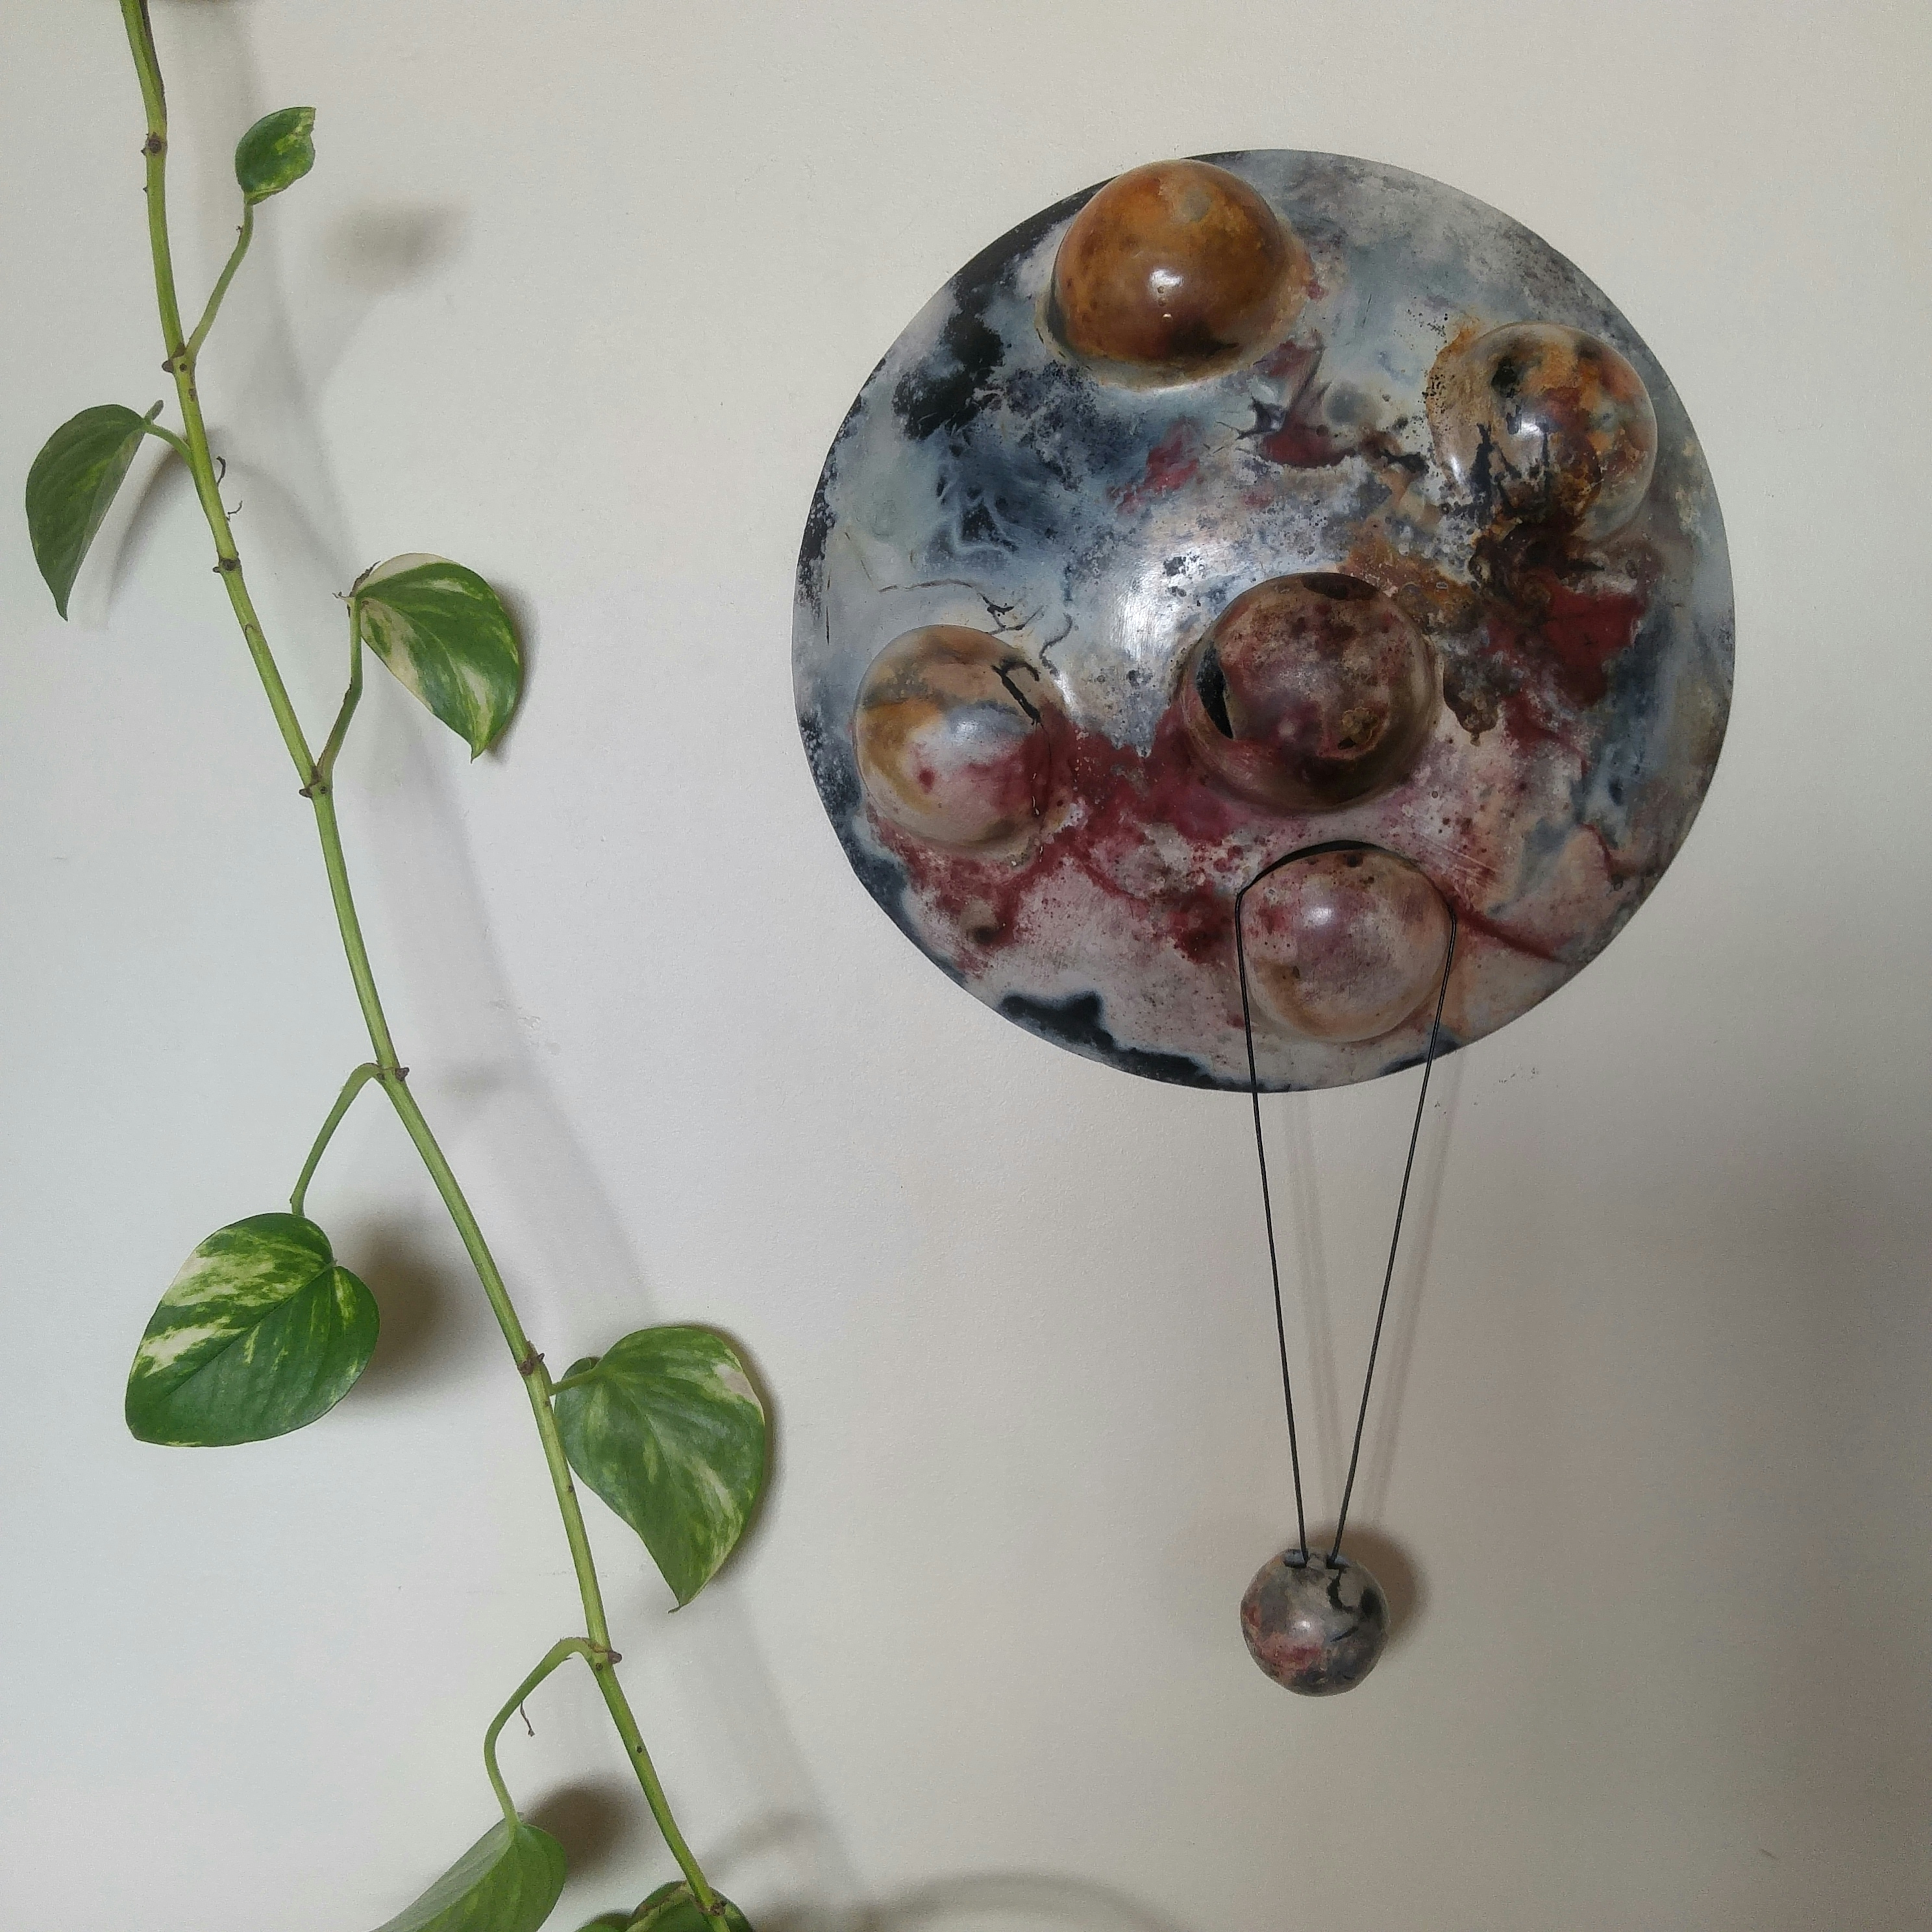 Pit-fired wall sculpture